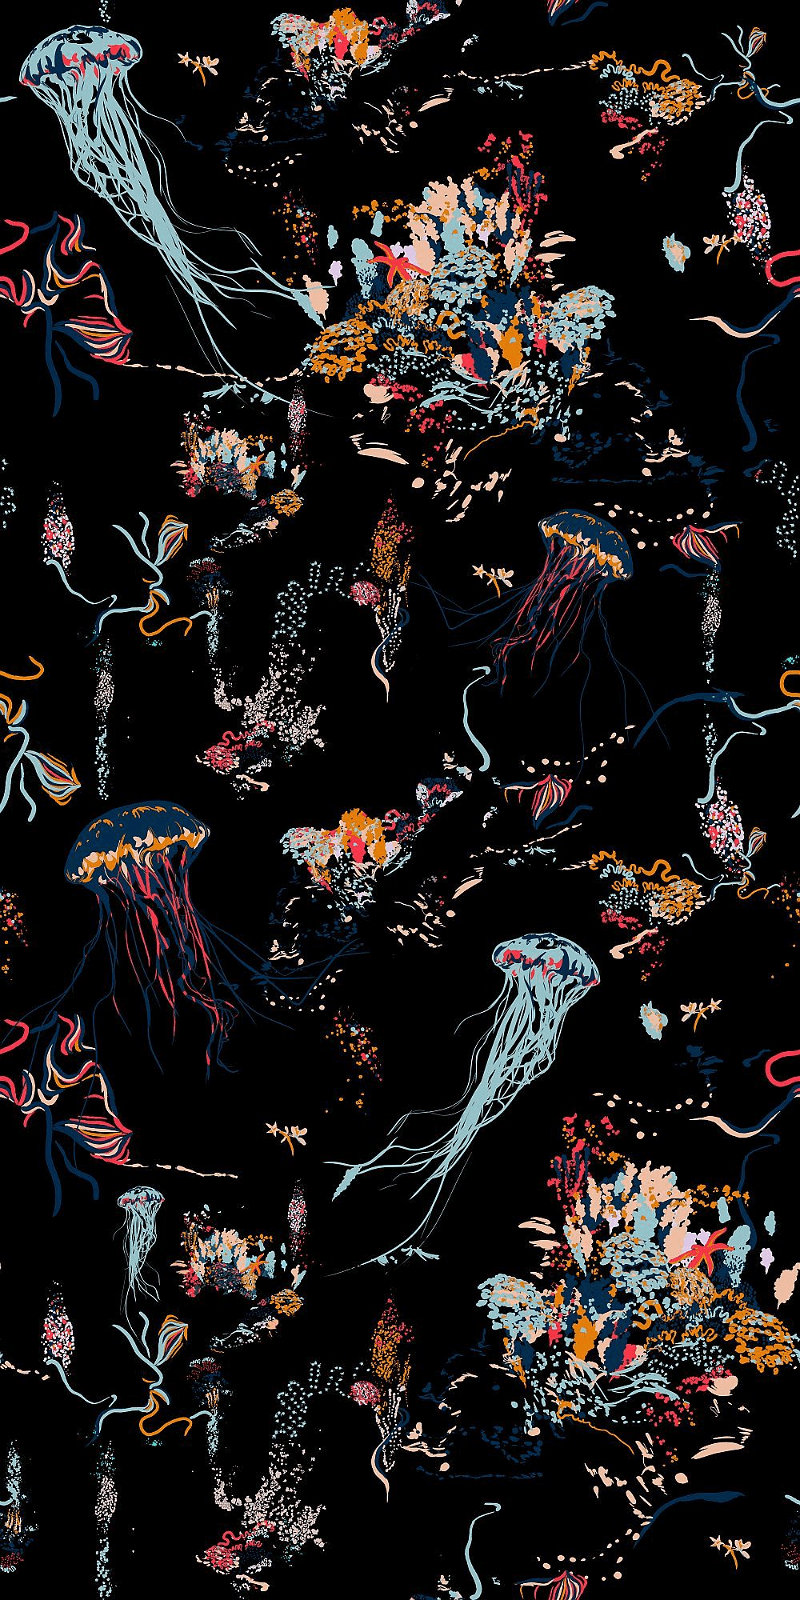 A pattern of jellyfish and other sea creatures - Art